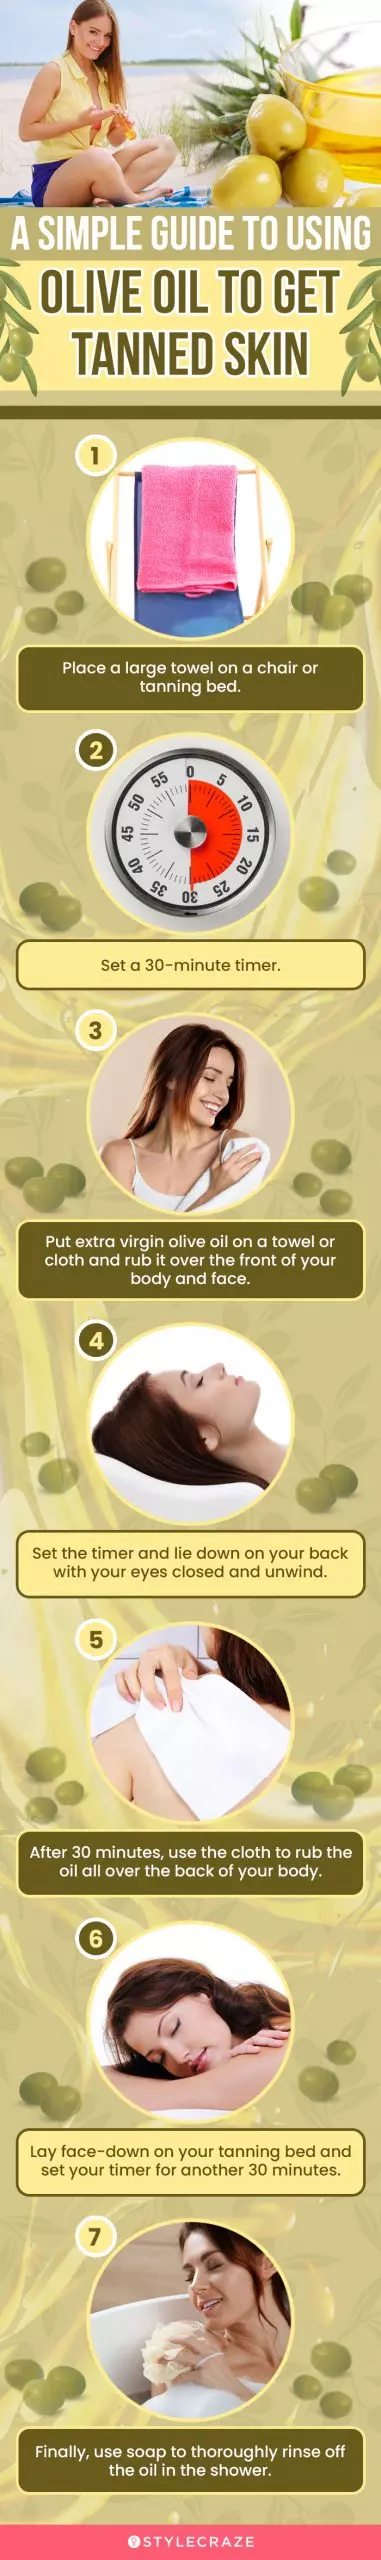 a simple guide to using olive oil to get tanned skin (infographic)